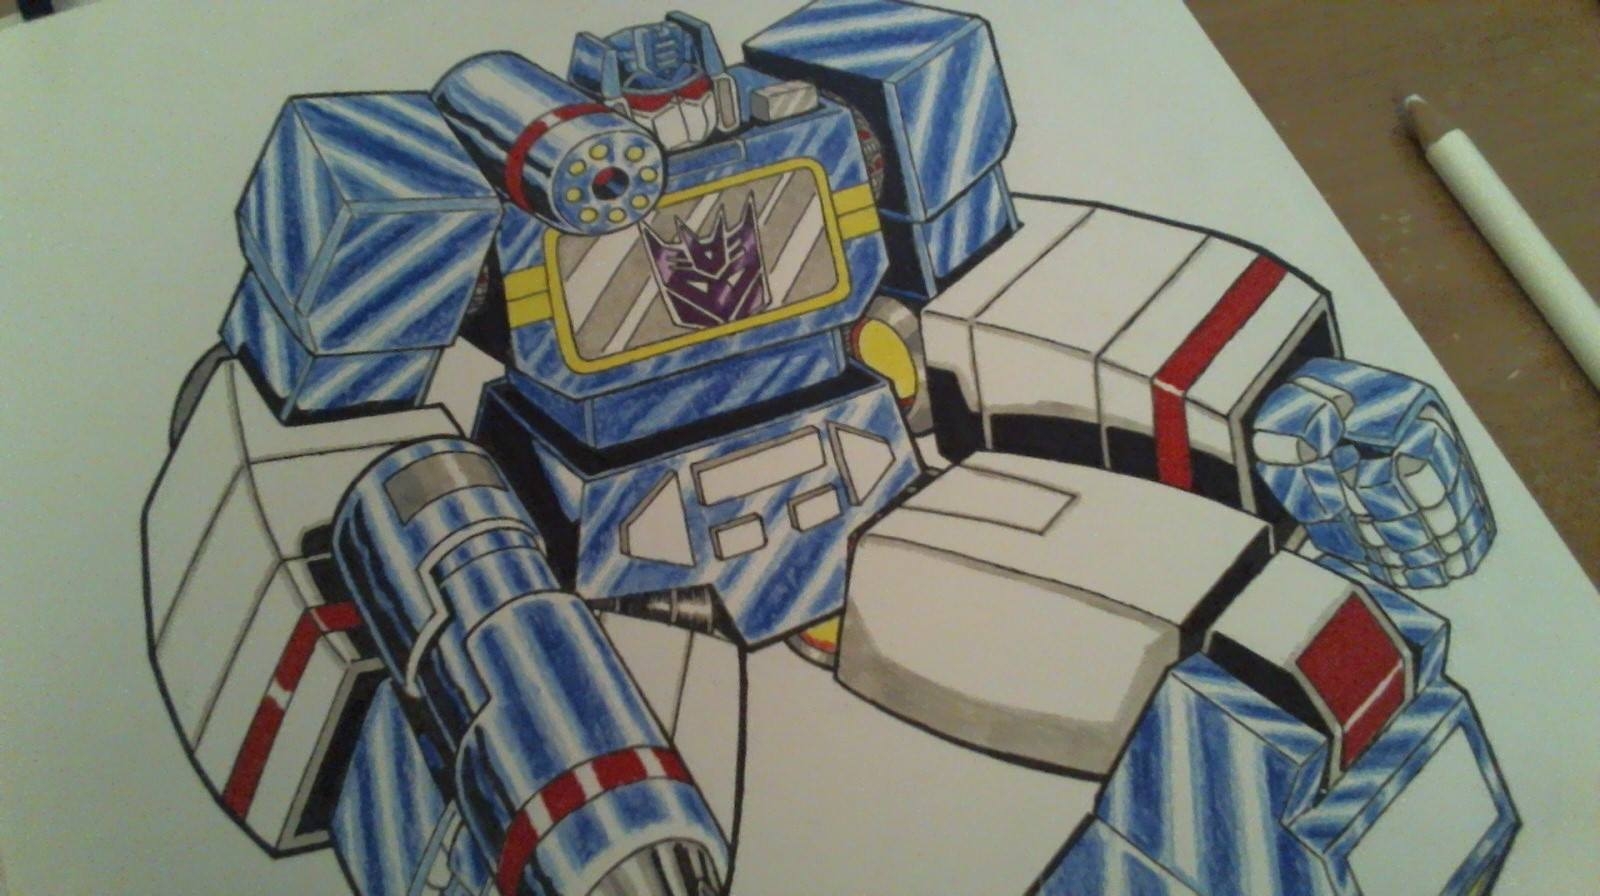 Want a commission of your favorite TRANSFORMER?